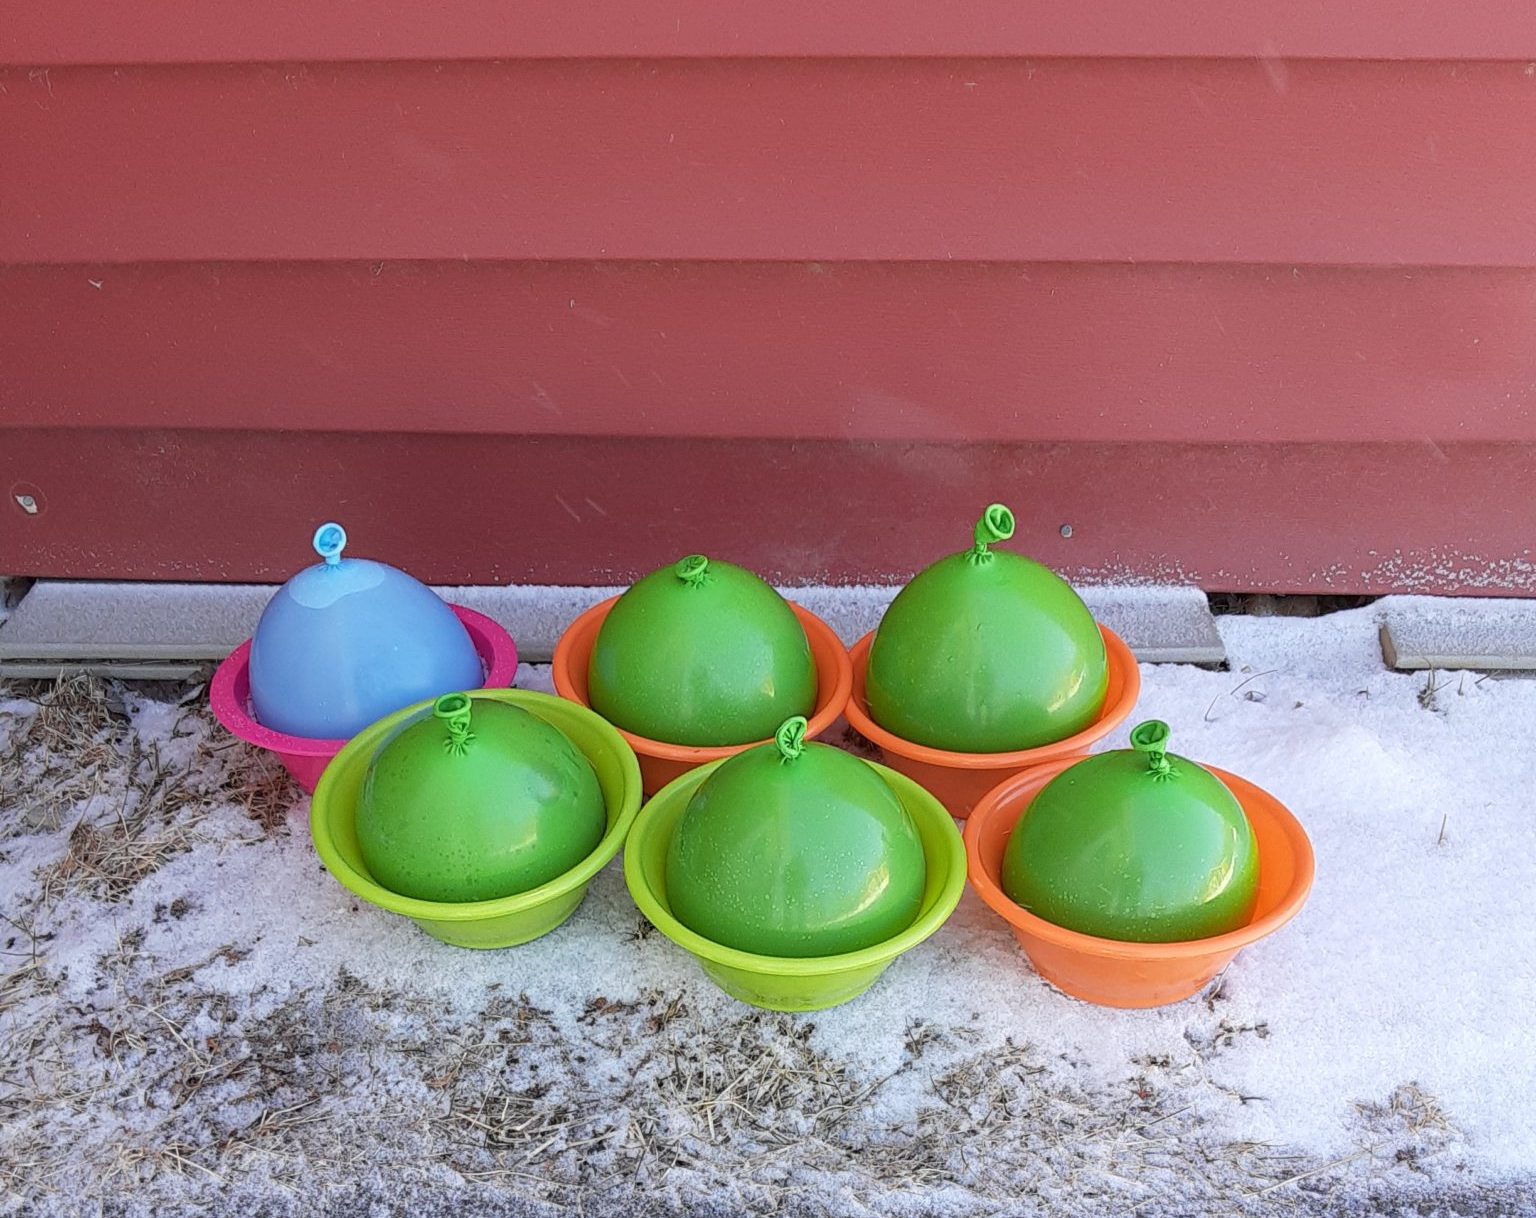 water balloons set outside to freeze for ice bowling